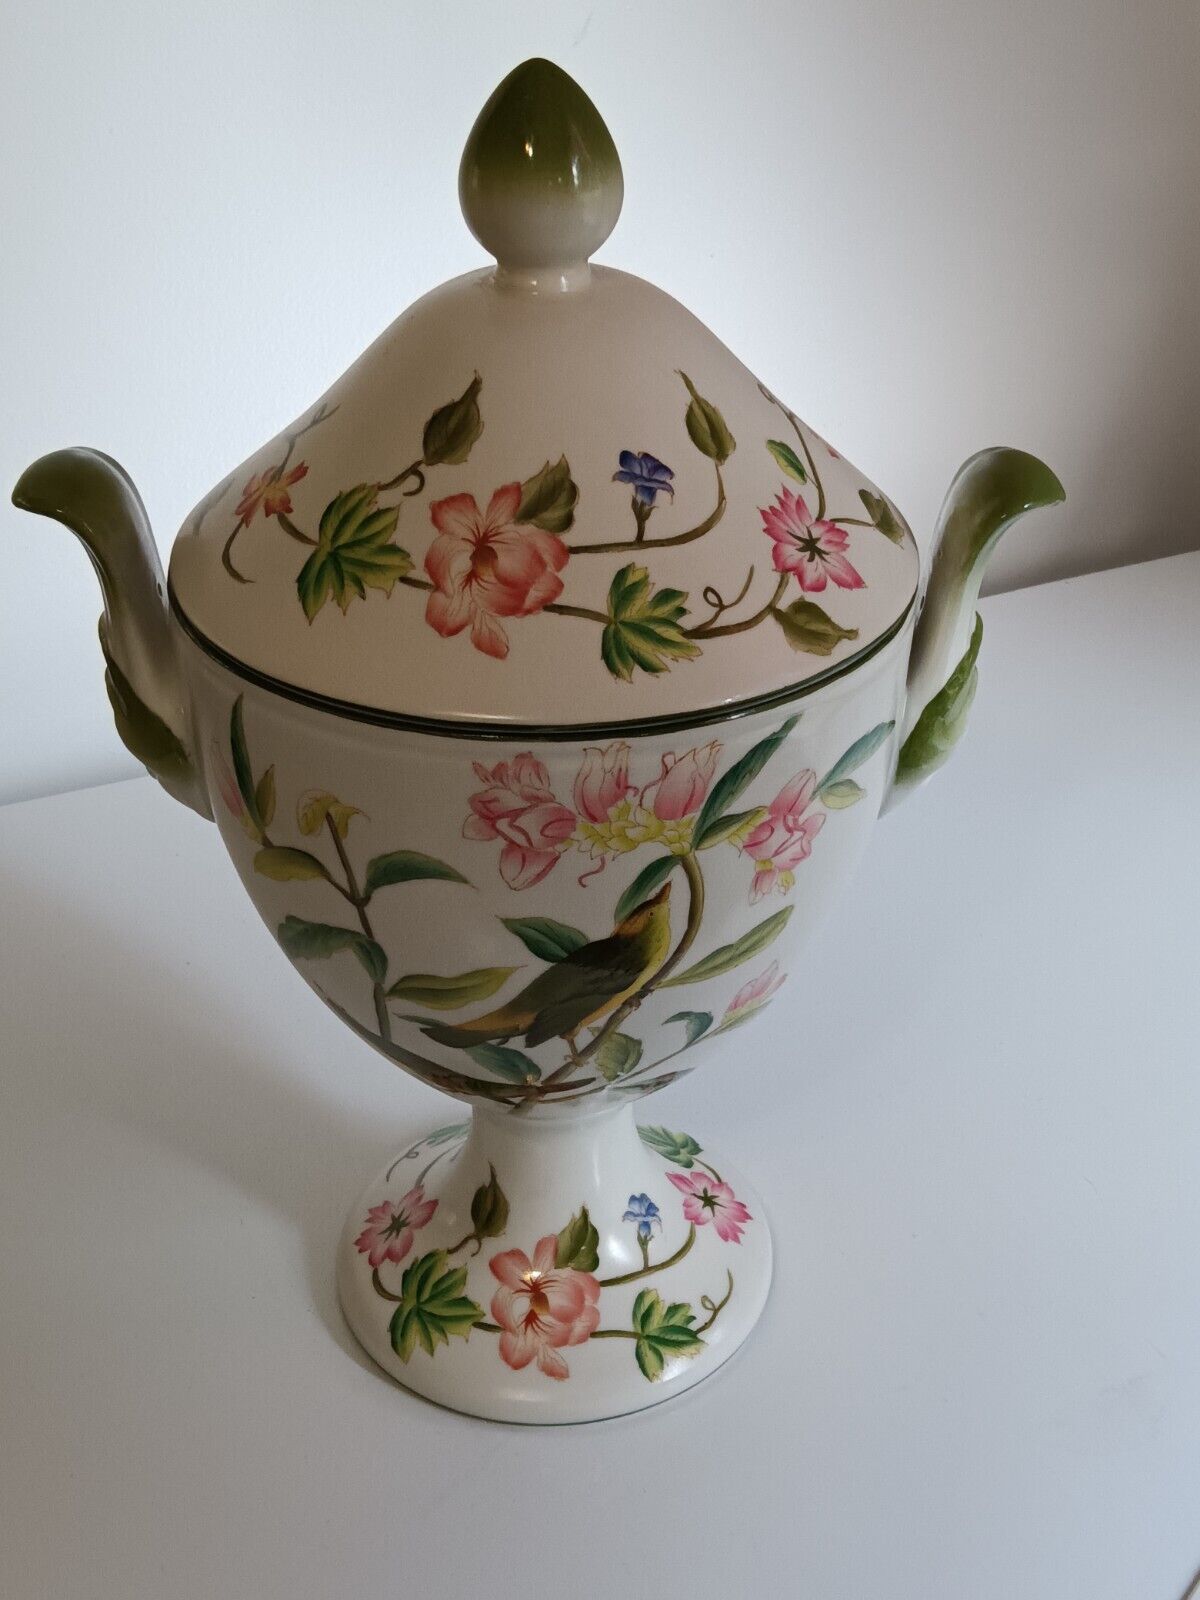 Vintage French Porcelain Soup tureen/lid, hand painted birds, flowers, face mask